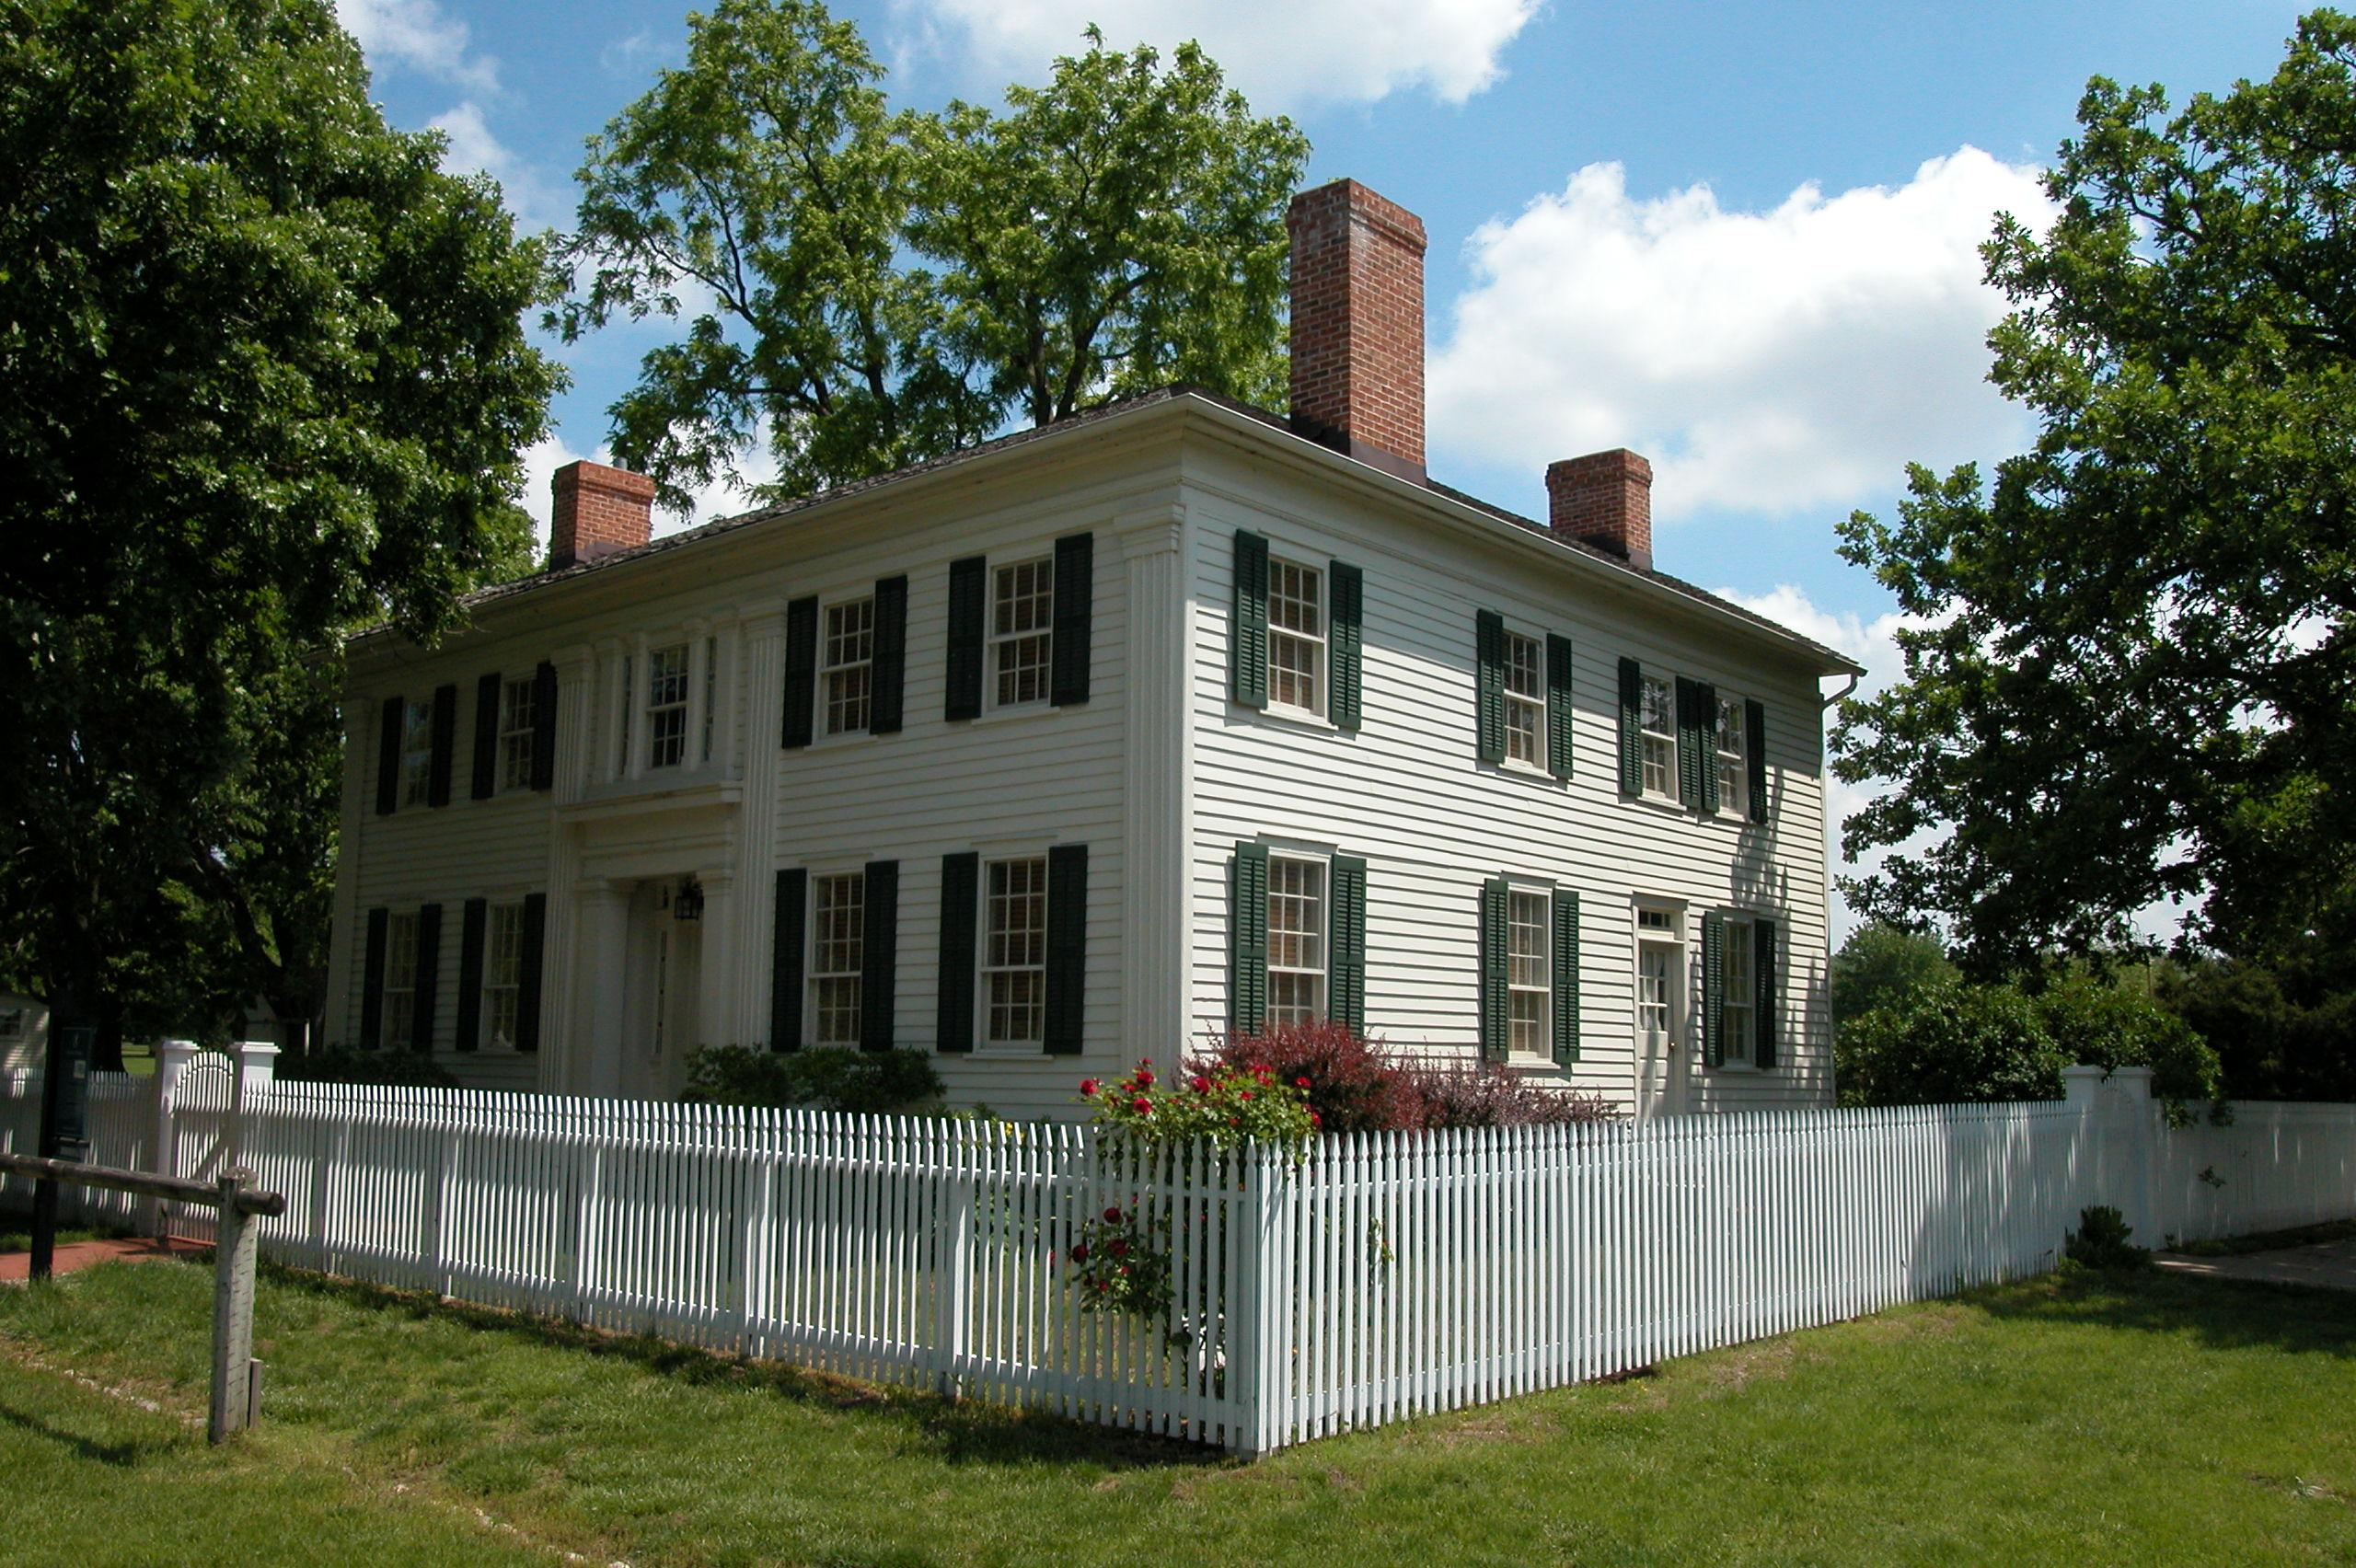 A large, white, two-story historic wood home with a red roof and white picket fence.